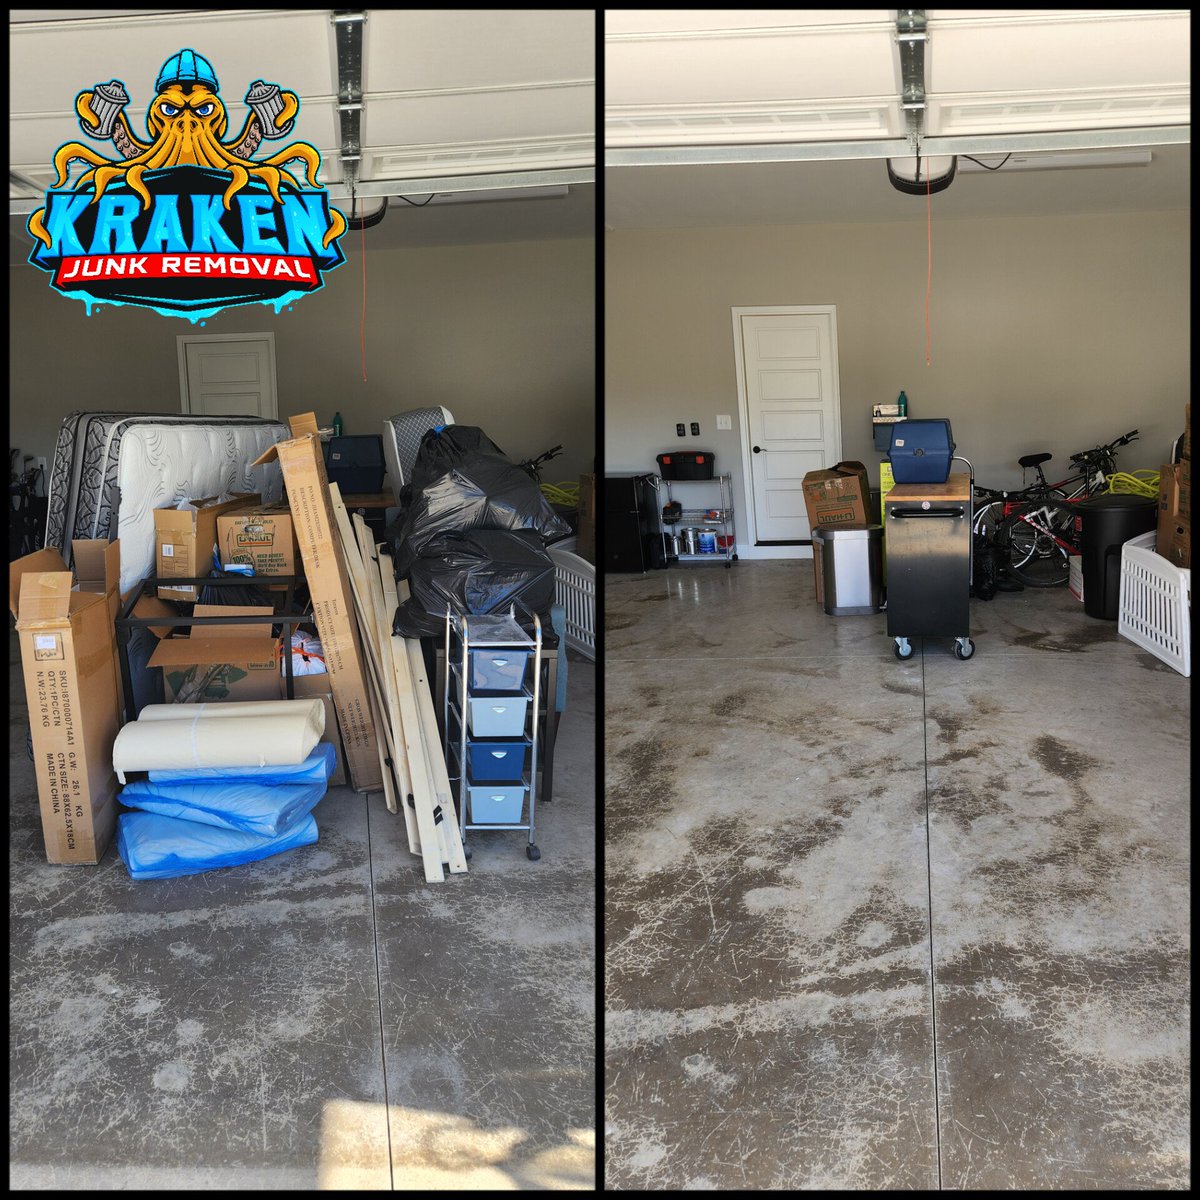 Customer moved back home to Gray, TN from Montana and had us remove some items he no longer needed. Thank you John for choosing Kraken Junk Removal! 👍

#johnsoncitytn #kingsporttn #junkremoval #junkremovalservices #junkremovalnearme #junkremovaljohnsoncity #junkremovalkingsport